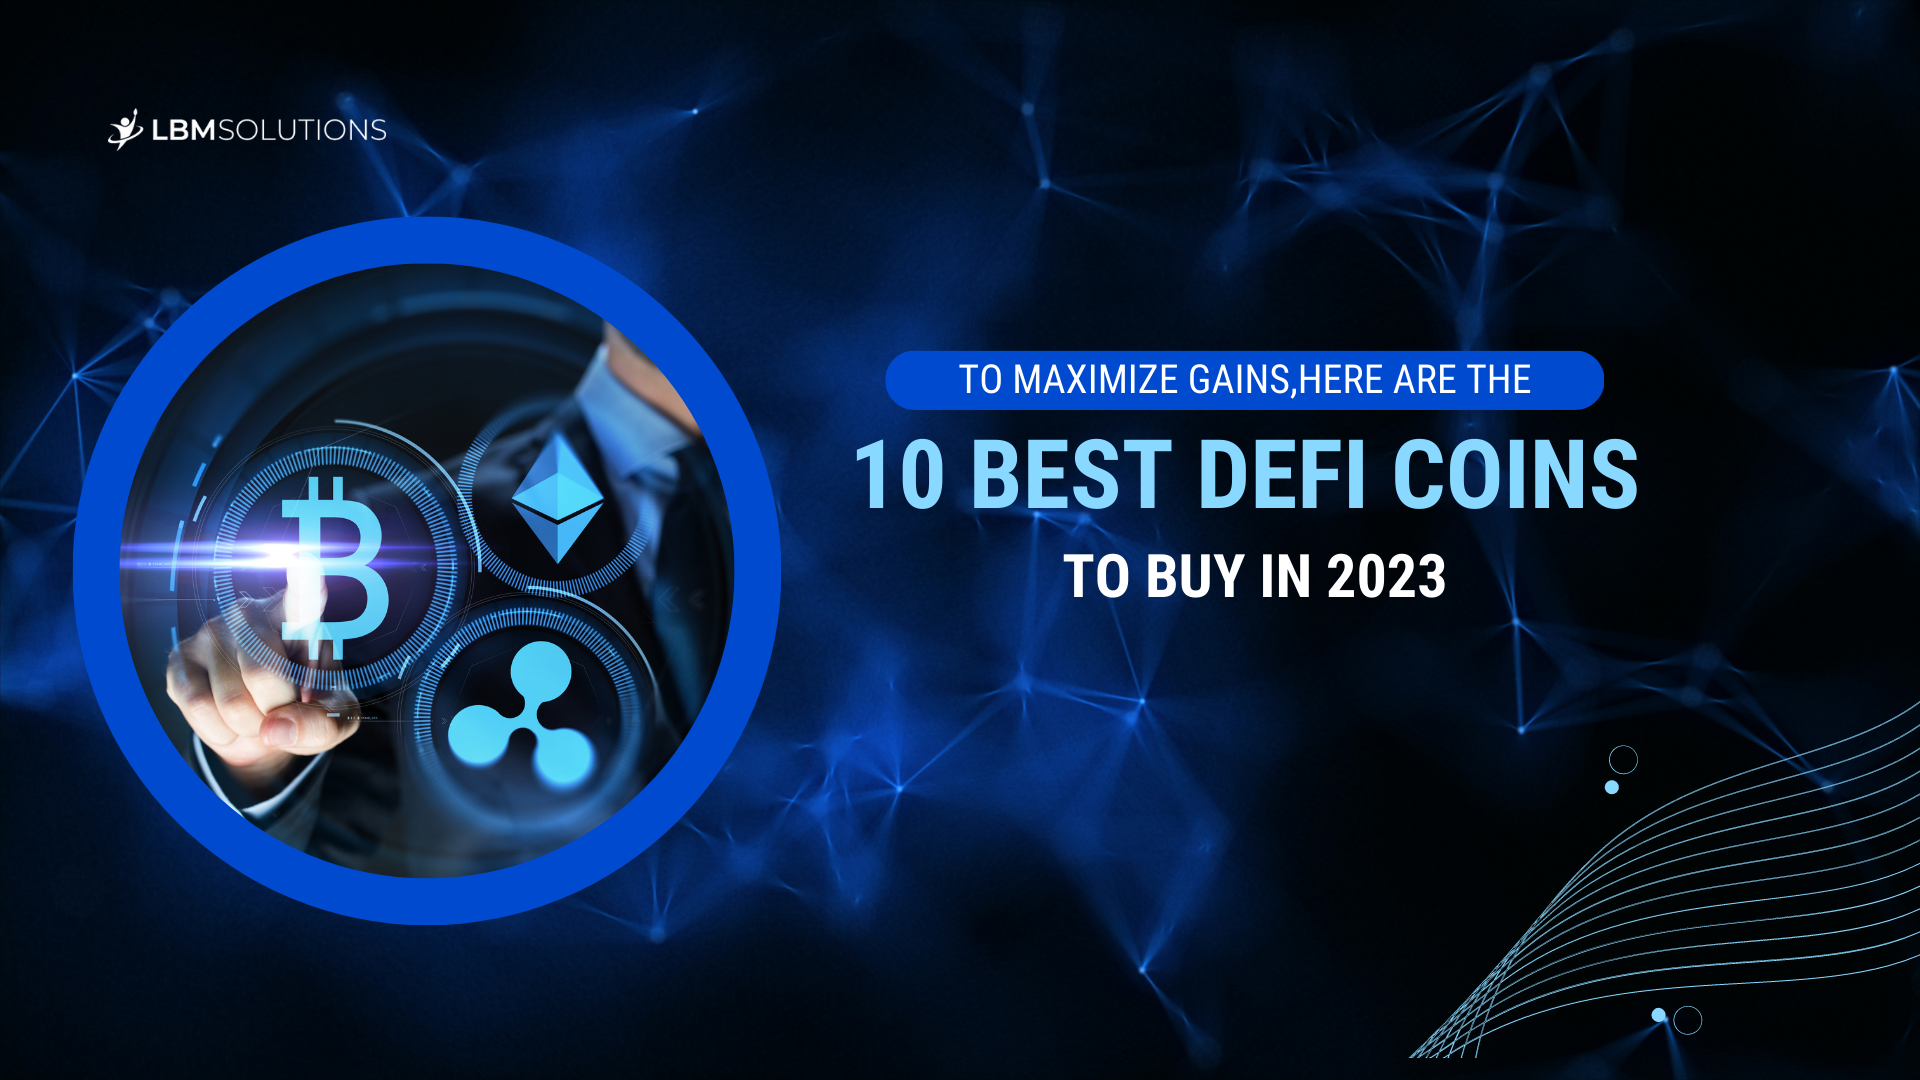 To Maximize Gains, Here Are the 10 Best DeFi Coins to Buy in 2023